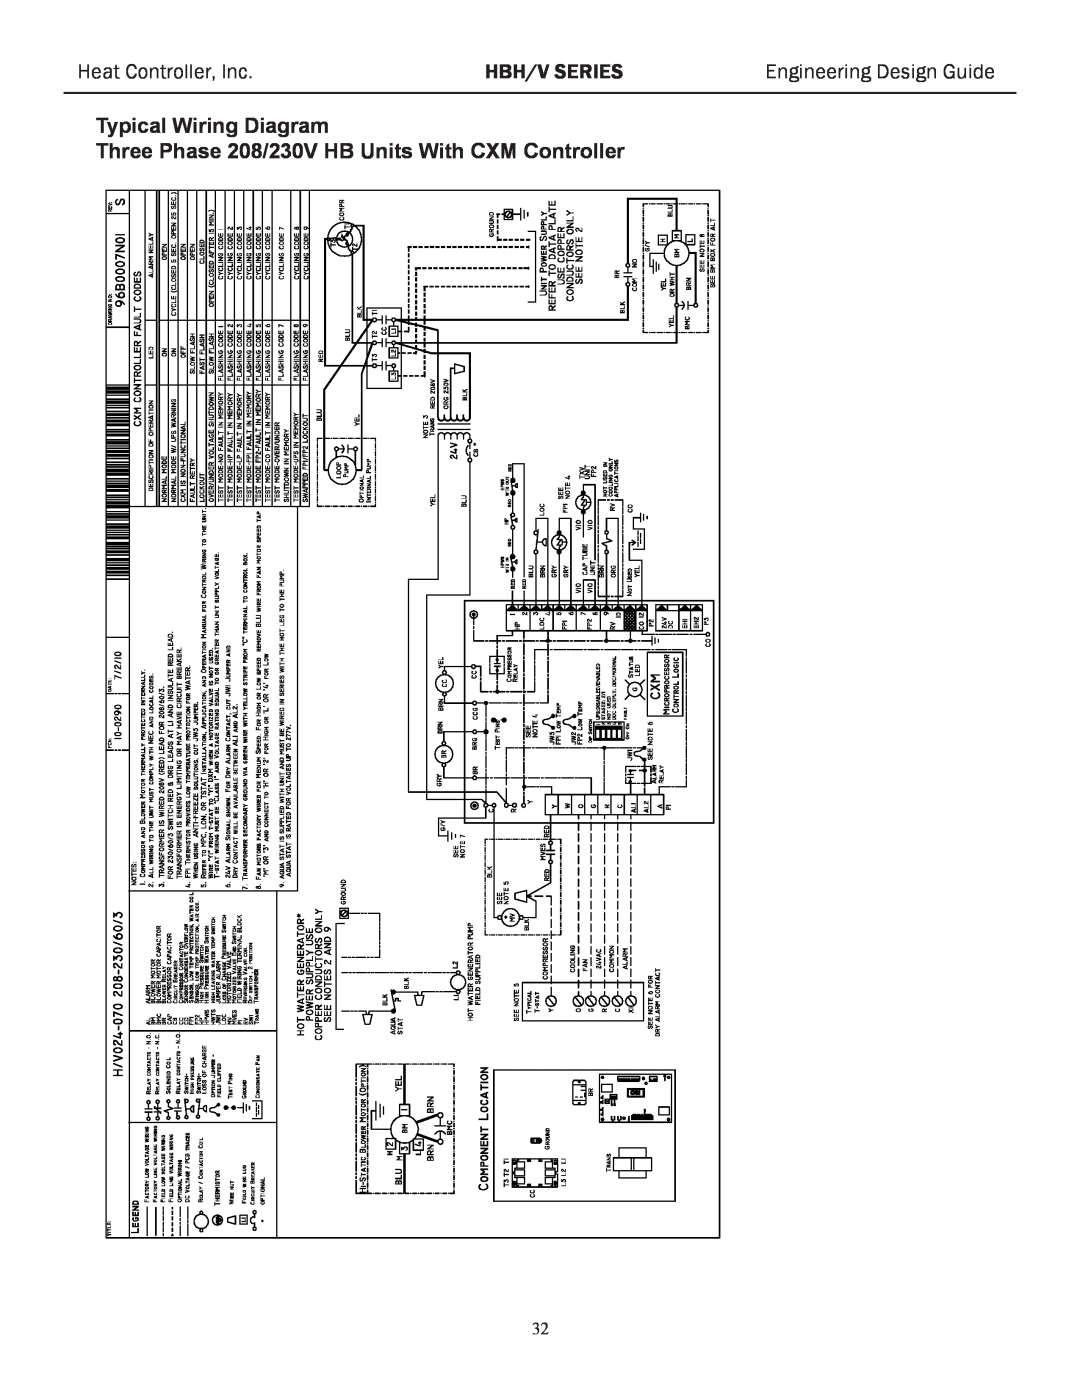 Heat Controller HBH/V Typical Wiring Diagram, Three Phase 208/230V HB Units With CXM Controller, Heat Controller, Inc 